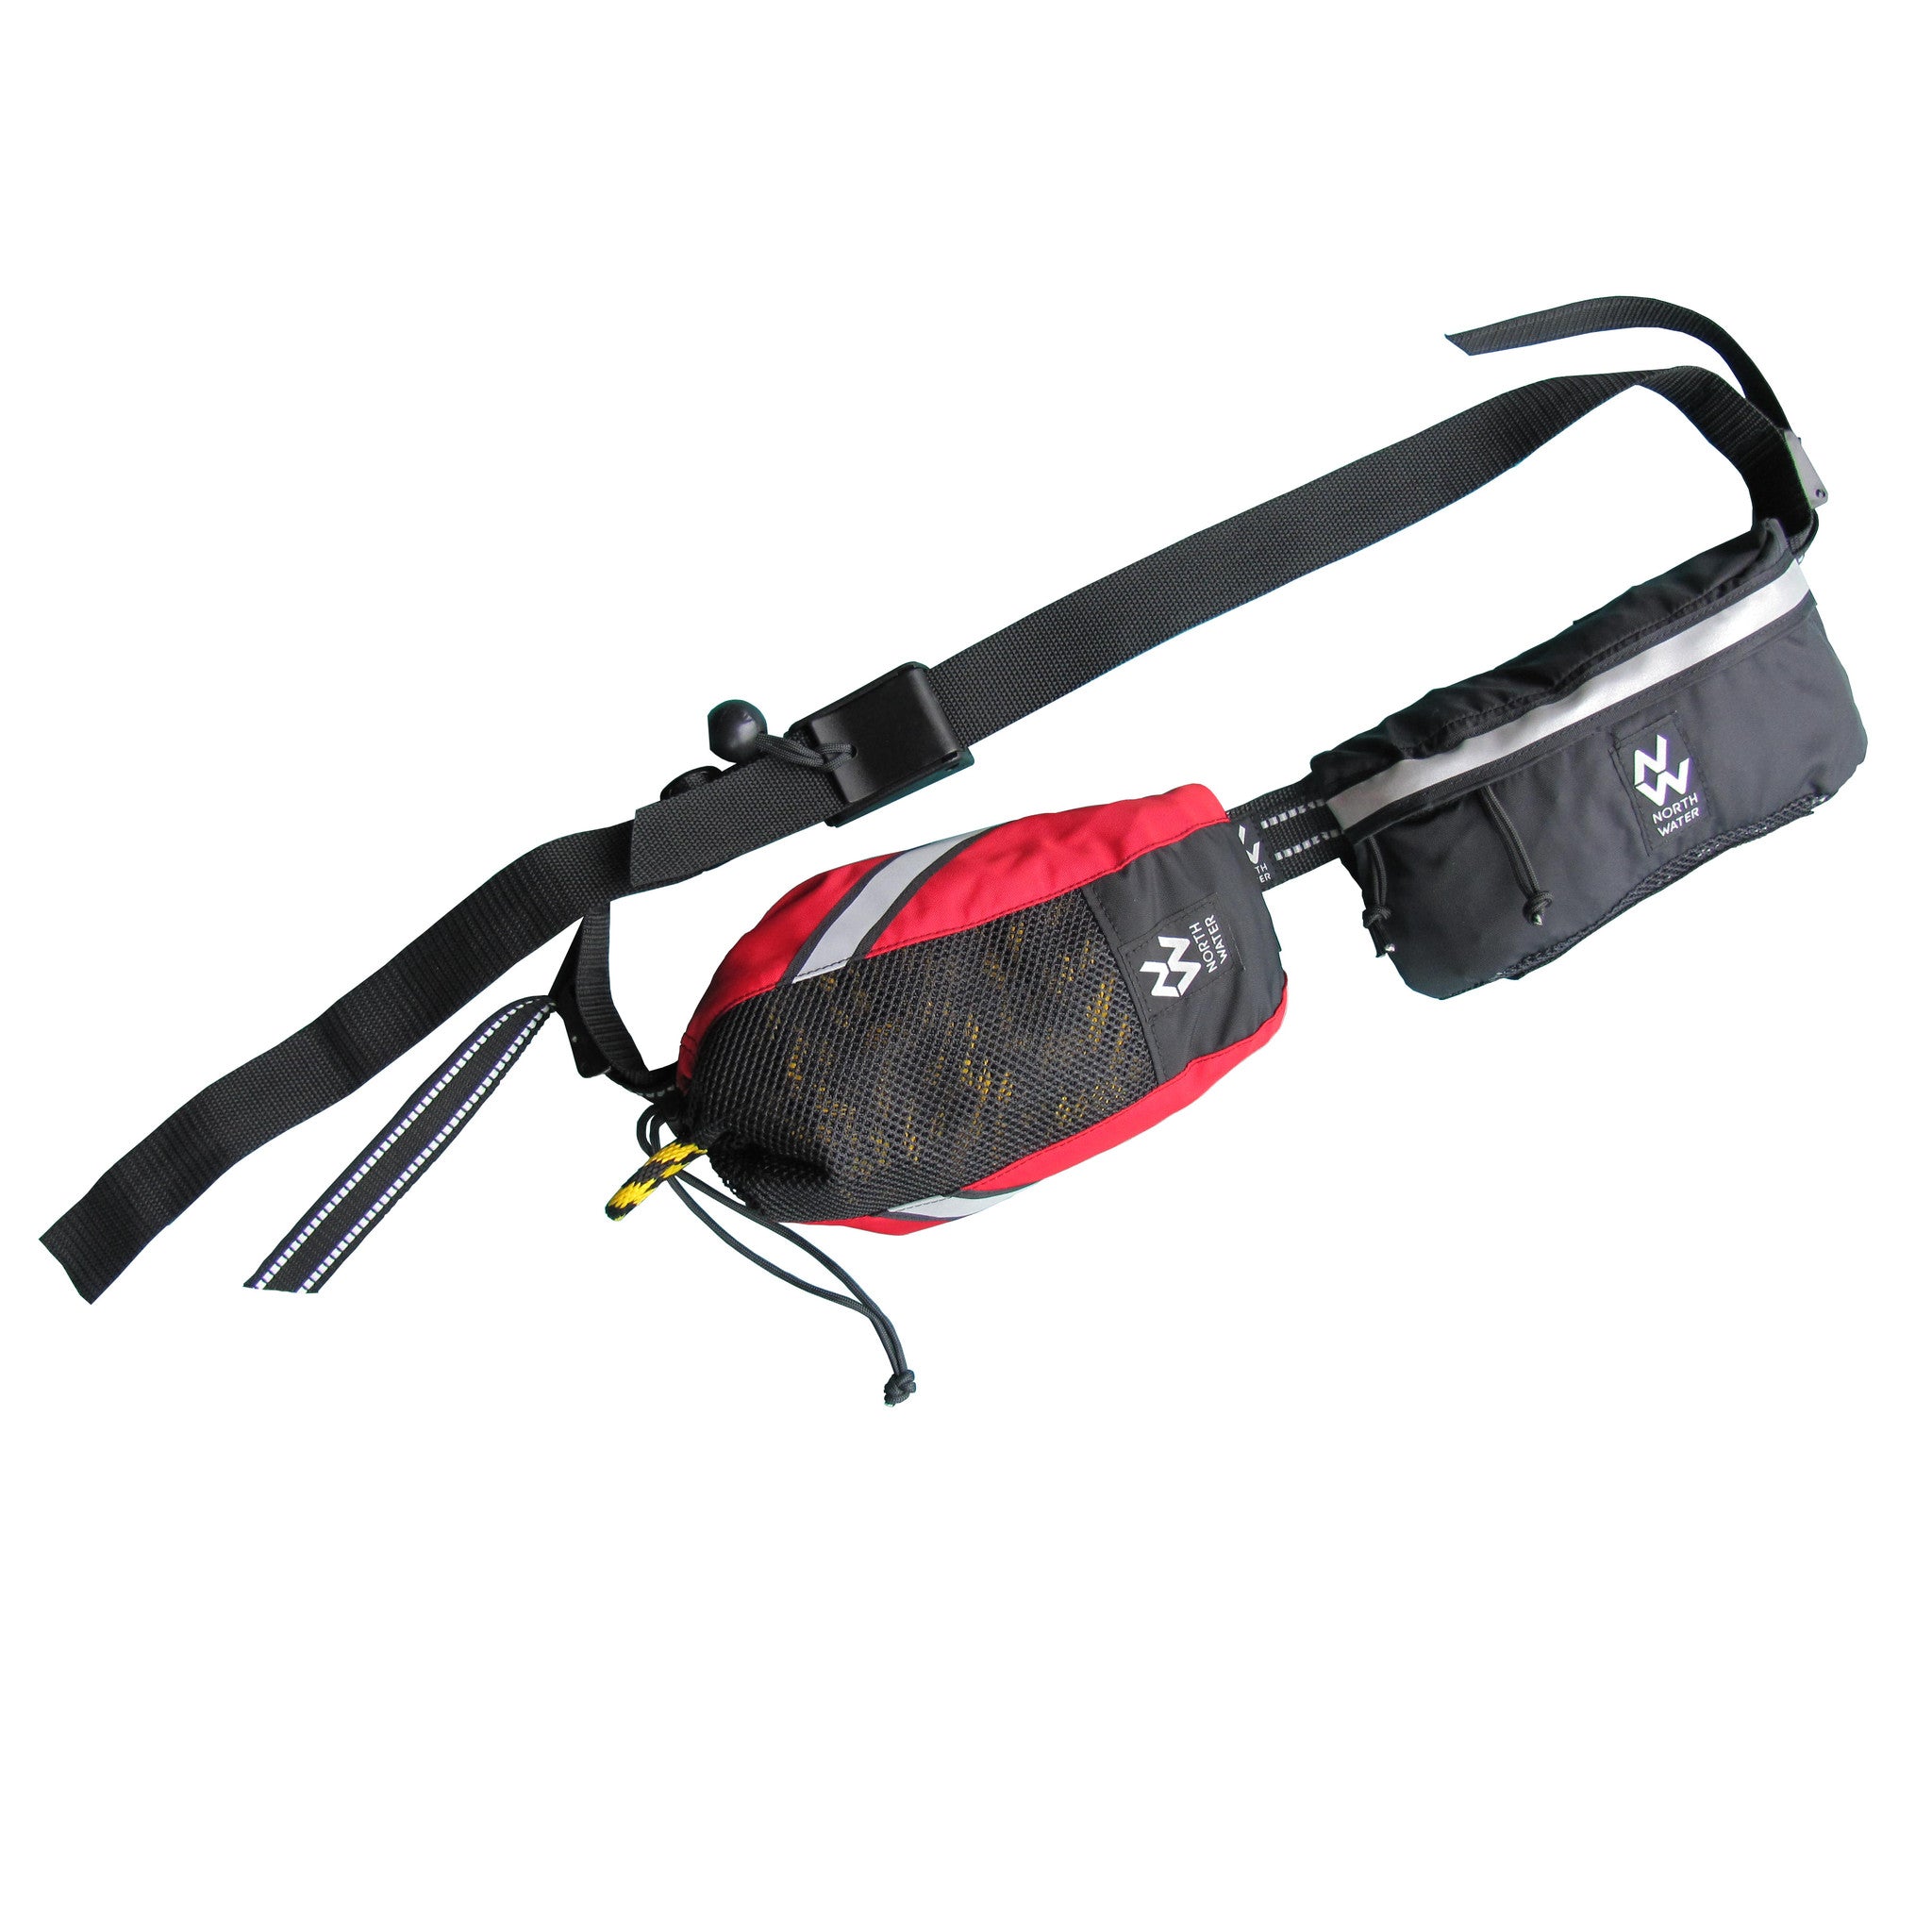 Quick Draw Deployment Belt shown with 1 Throw Line and 1 Gear Pouch